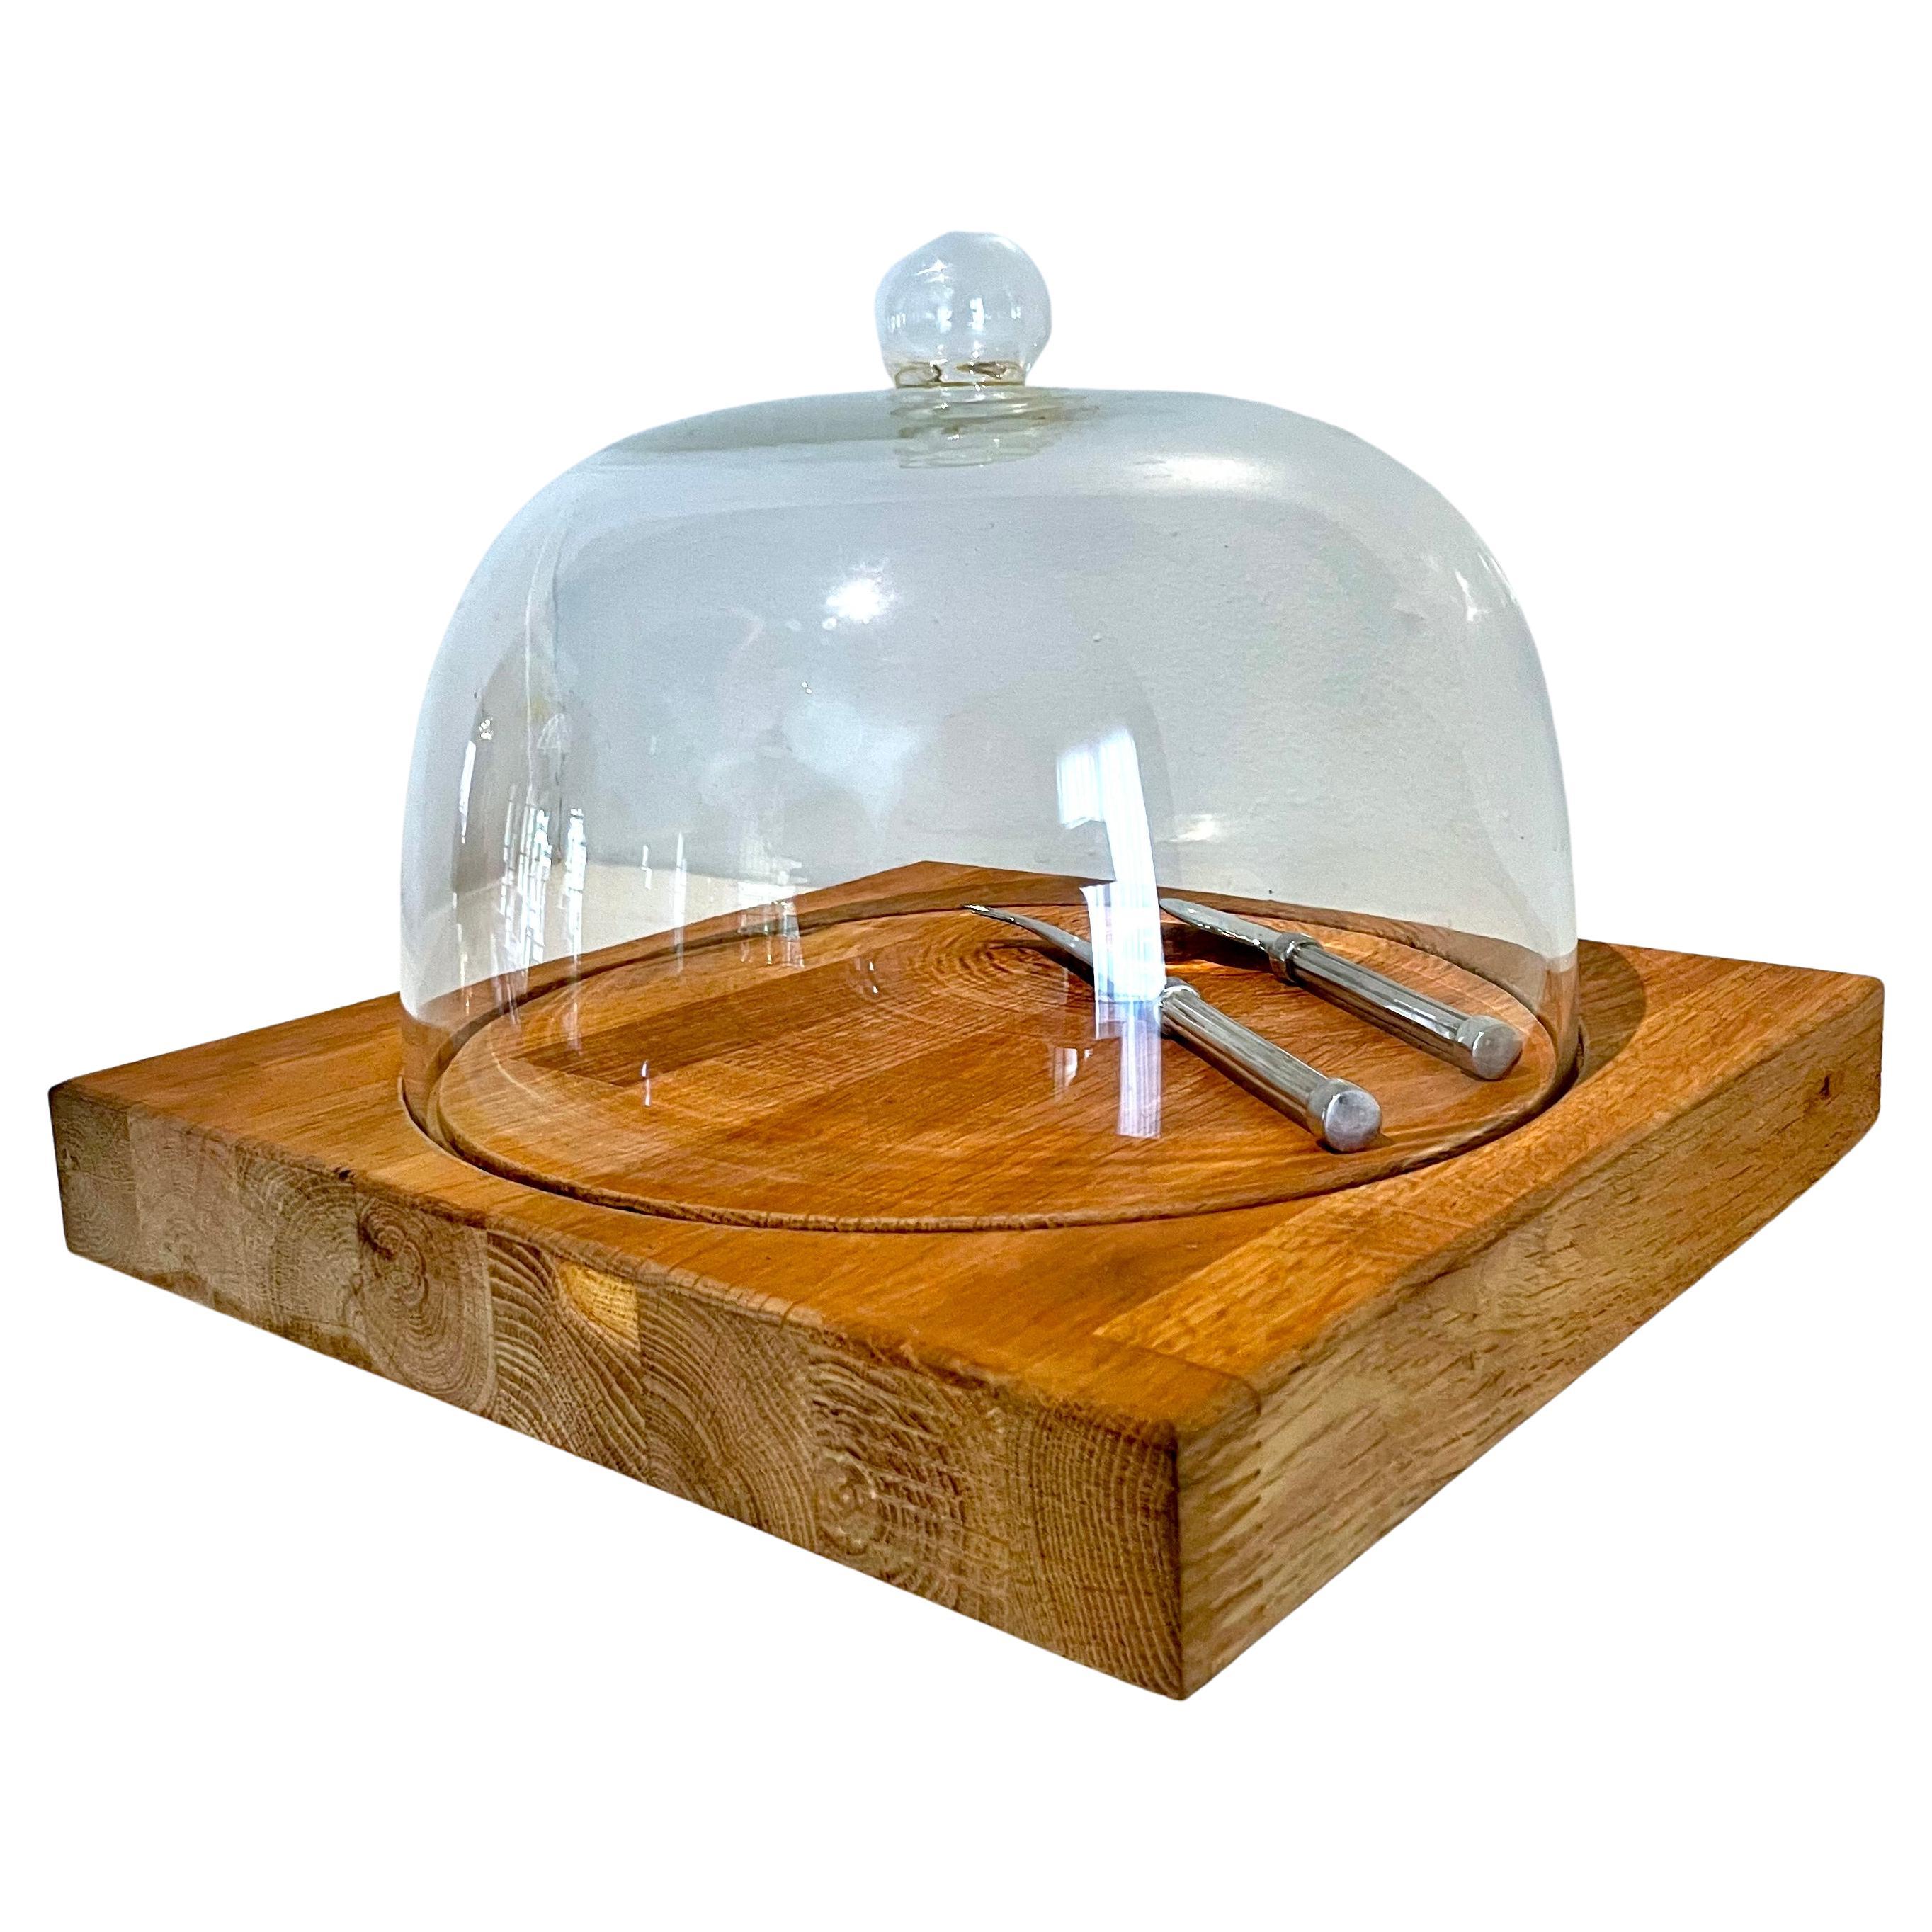 Cheese or charceuterie plate with glass domed lid and silver serving utensils. The glass lid fits securely into a groove carved into the wooden base. The silver serving set have pinstriped handles for some mid-century modern influence. 

A beautiful